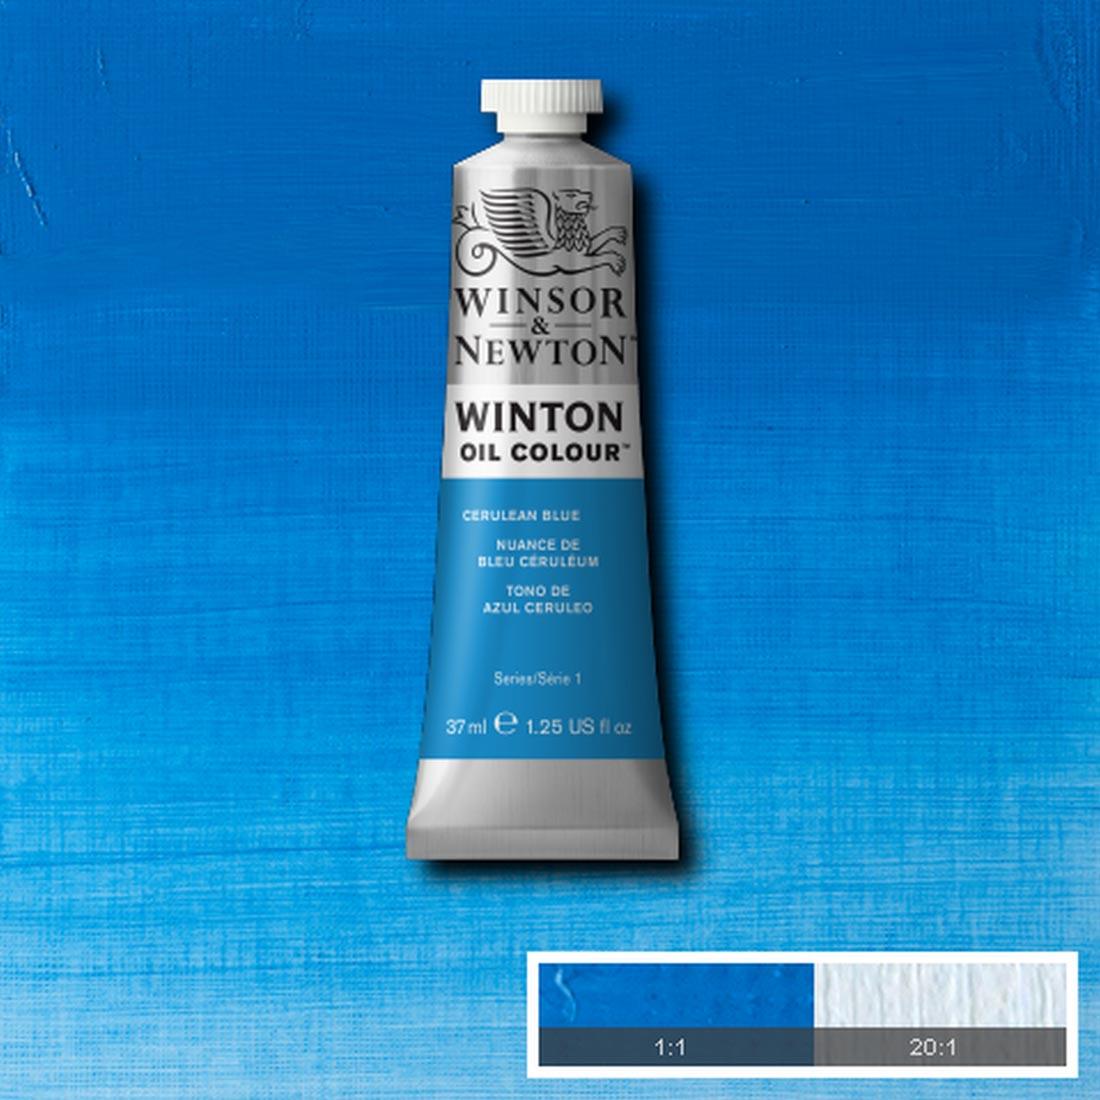 Tube of Cerulean Blue Winsor & Newton Winton Oil Colour with a paint swatch for the background